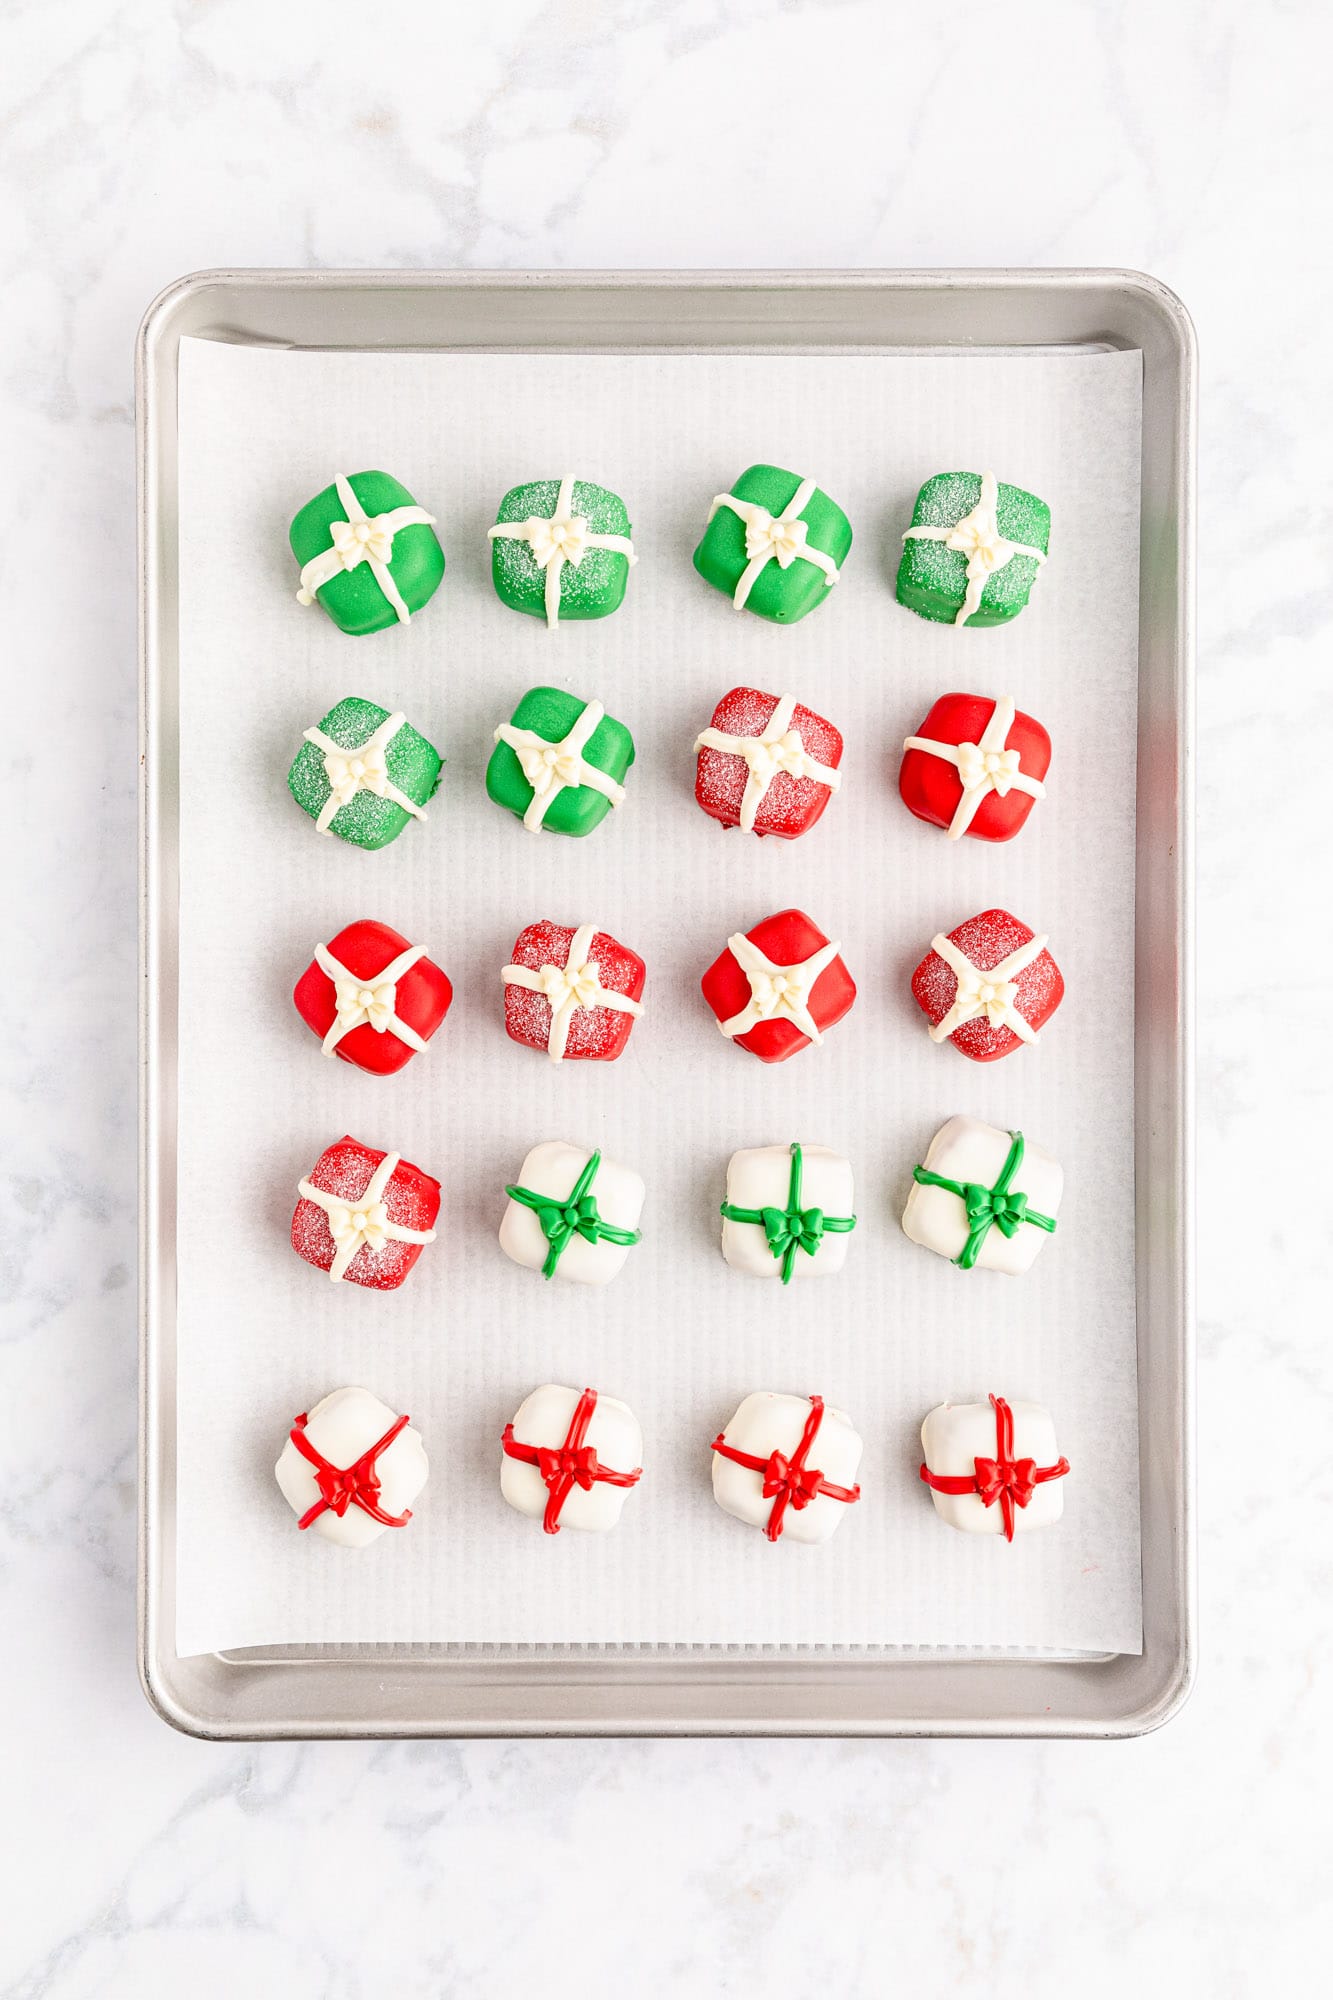 Decorated oreo truffles that look presents